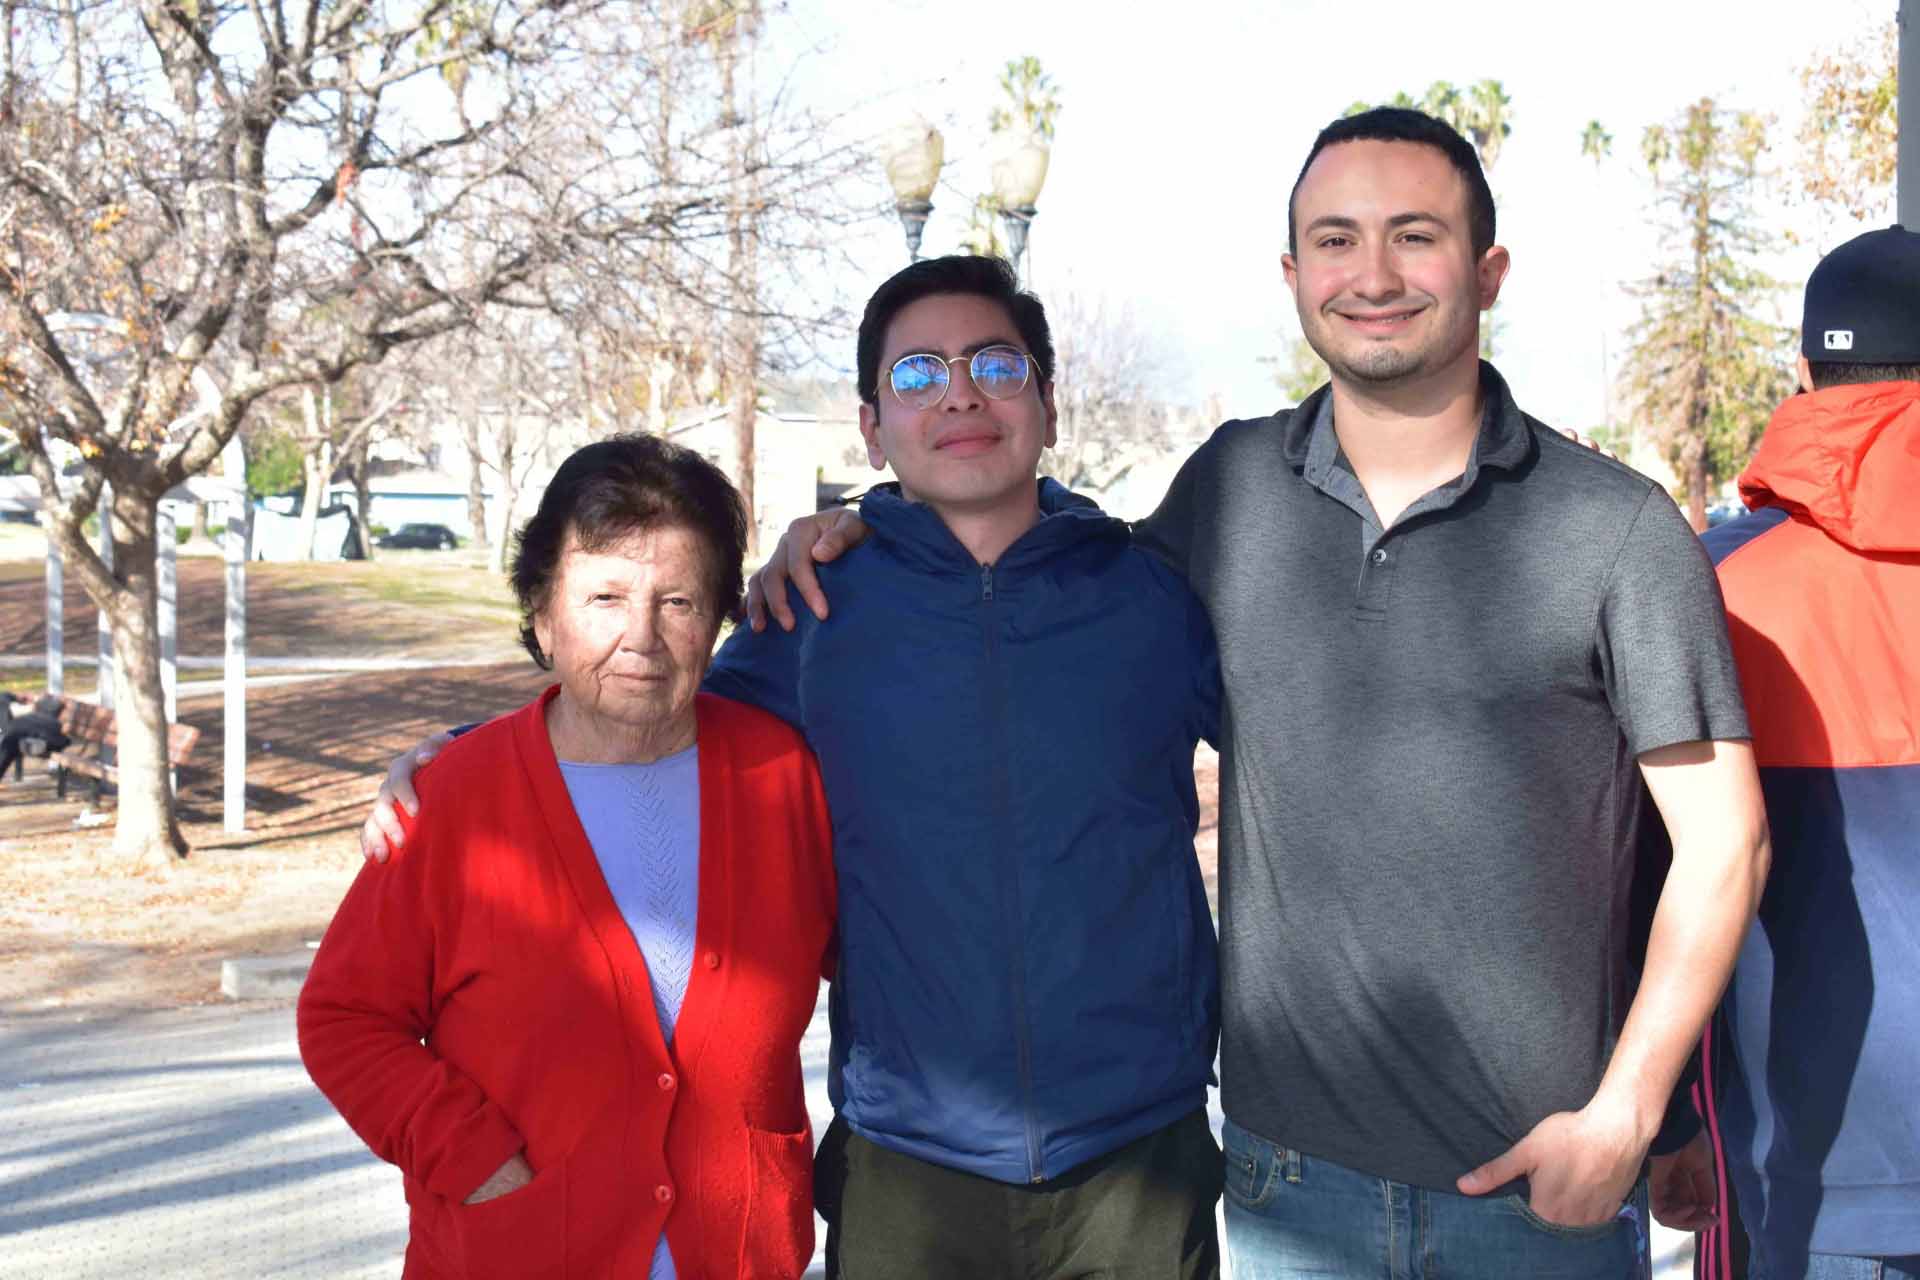 Gaeta (center) when he was a CSUSB student, with his cousin (right), and Gaeta’s aunt (left) when they were on the CSUSB campus volunteering for a holiday food drive.